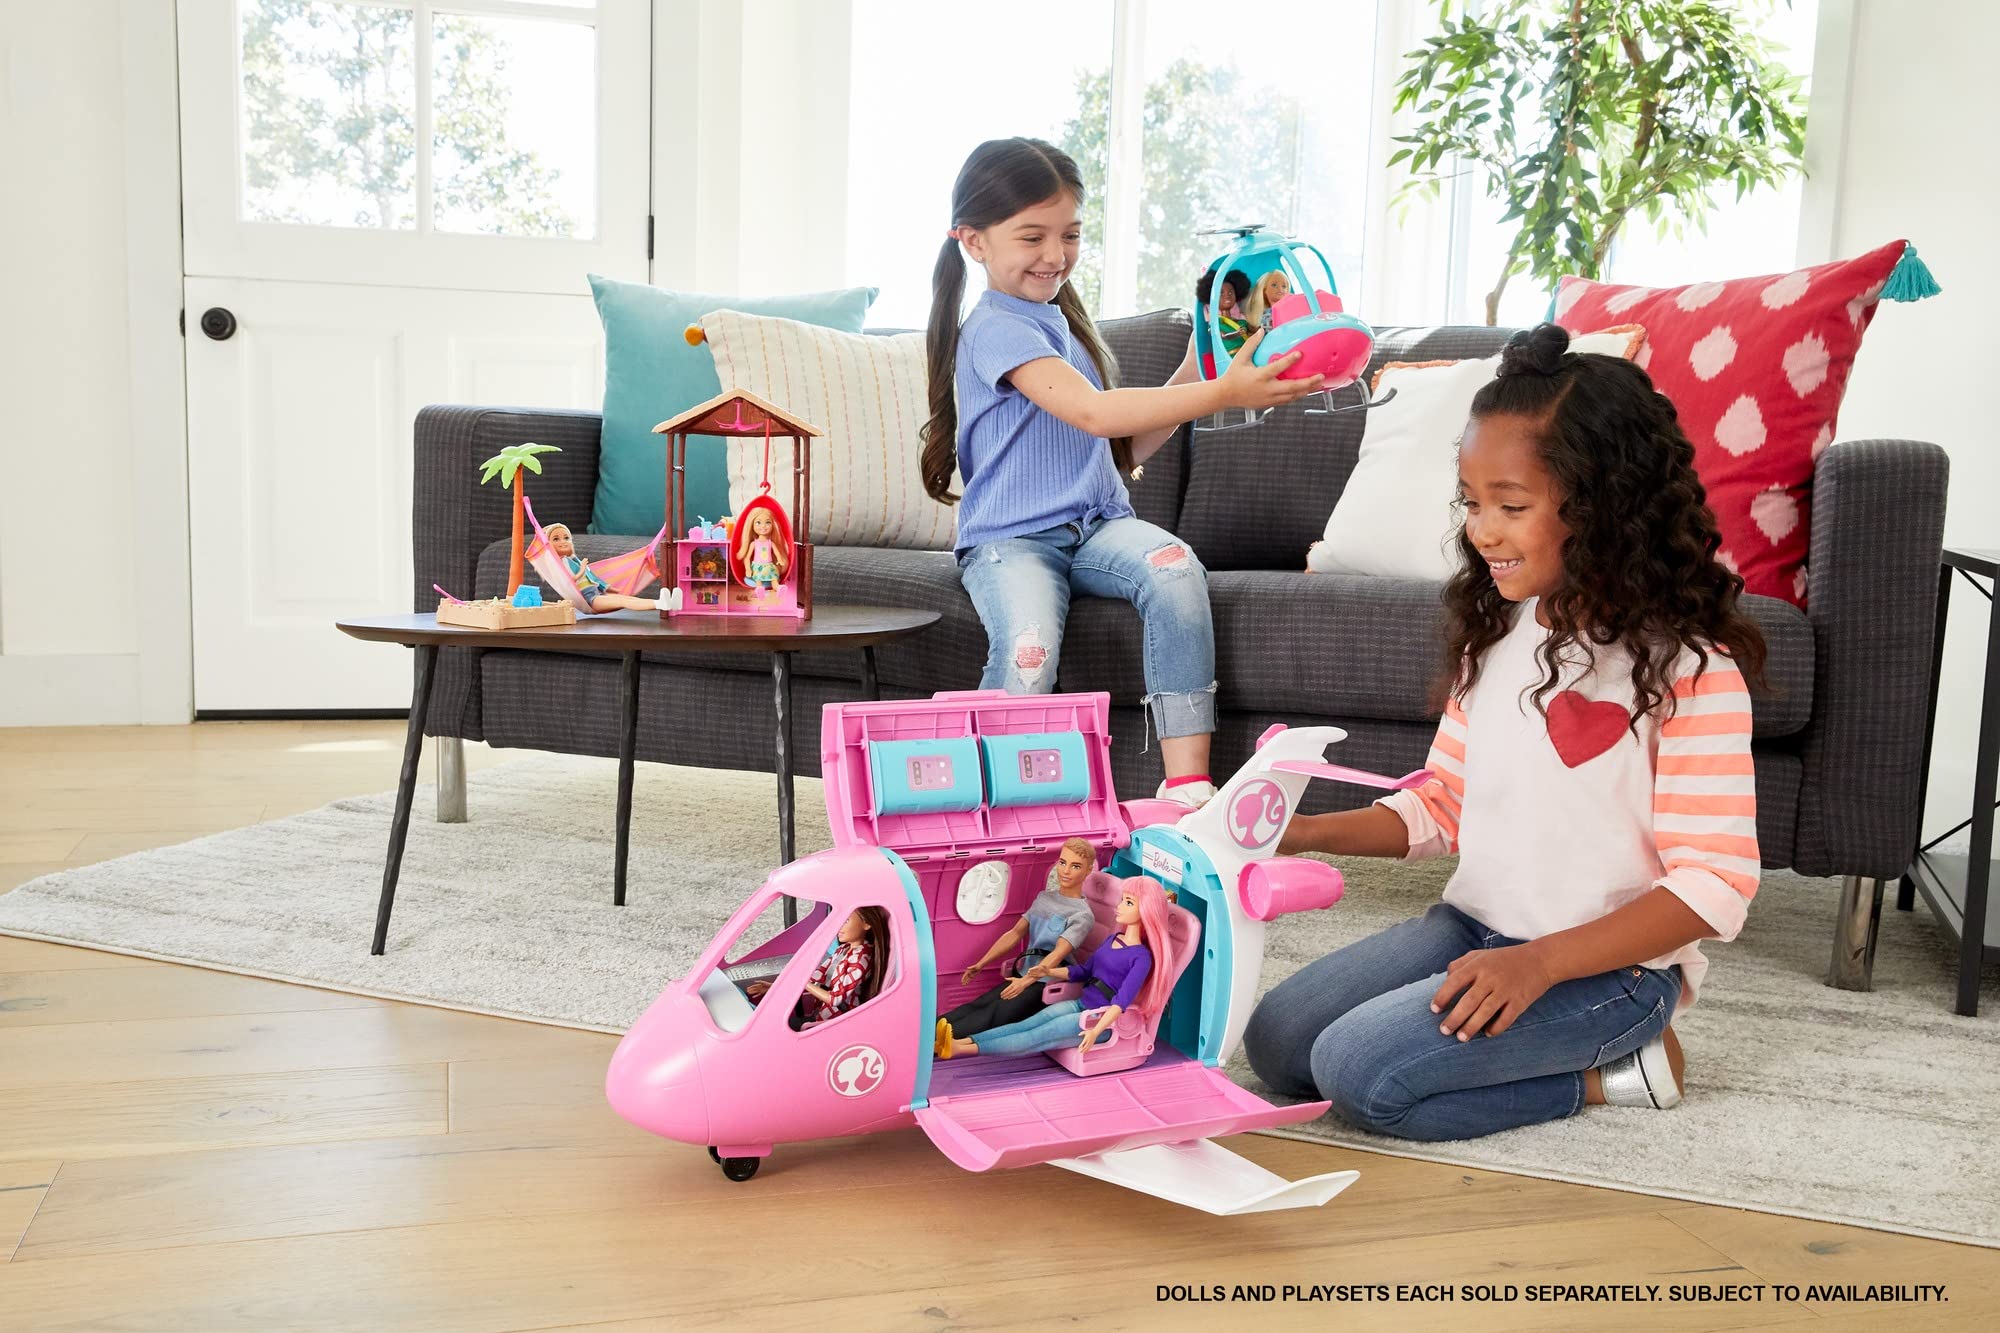 Barbie Dreamplane Airplane Toys Playset with 15+ Accessories Including  Puppy, Snack Cart, Reclining Seats and More ( Exclusive)